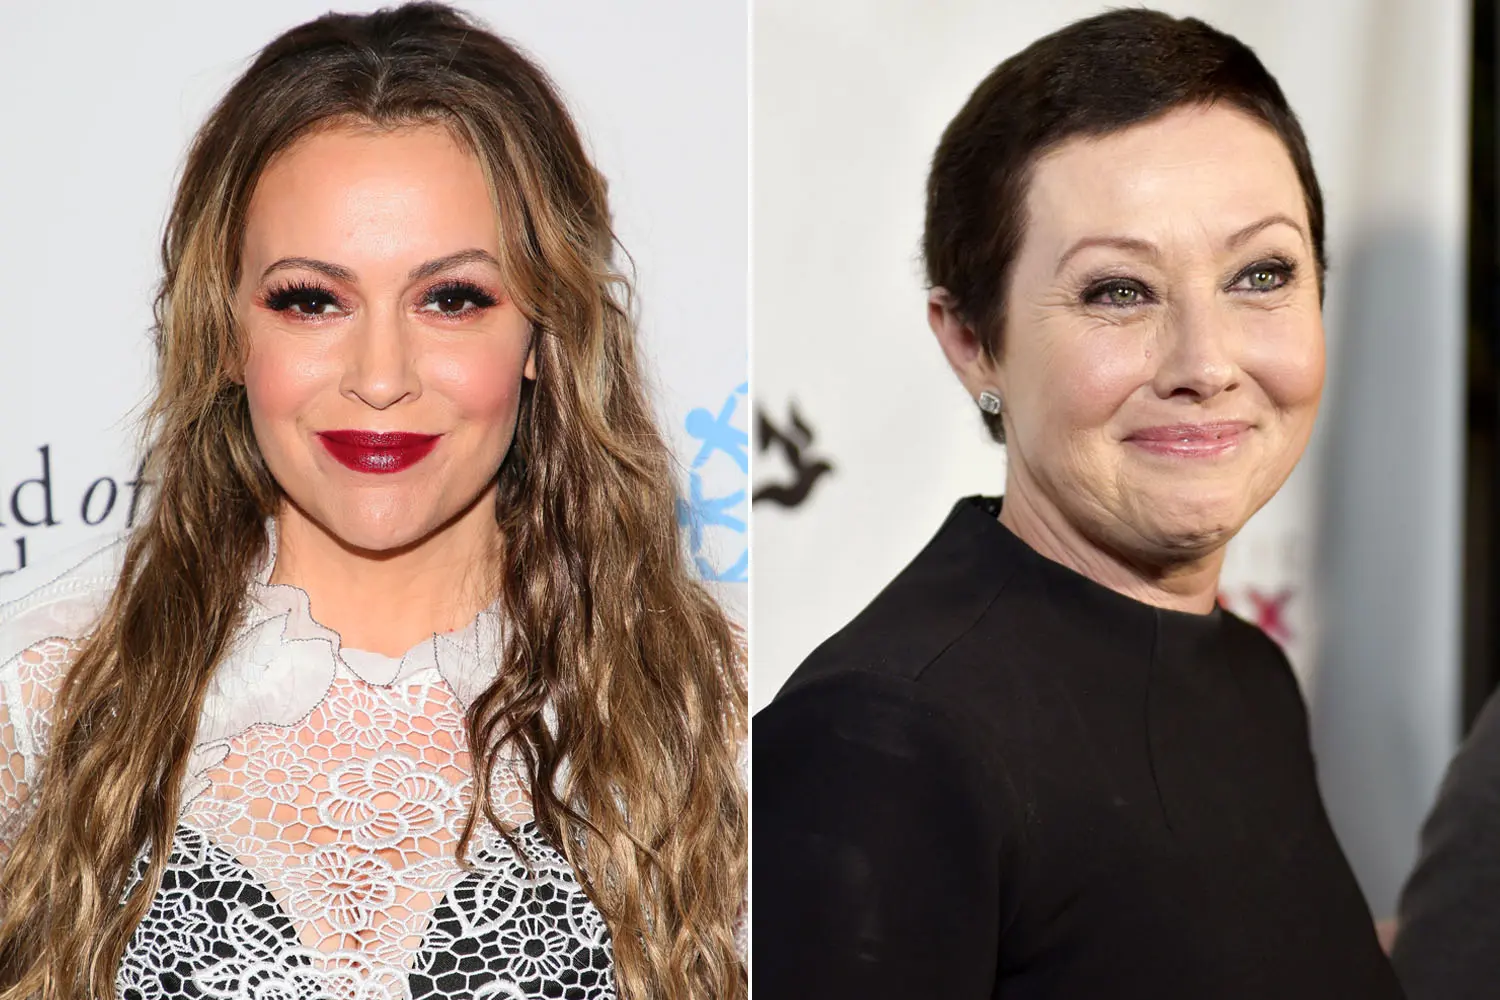 Alyssa Milano Reacts to Claims She Got Shannen Doherty Fired from ‘Charmed’